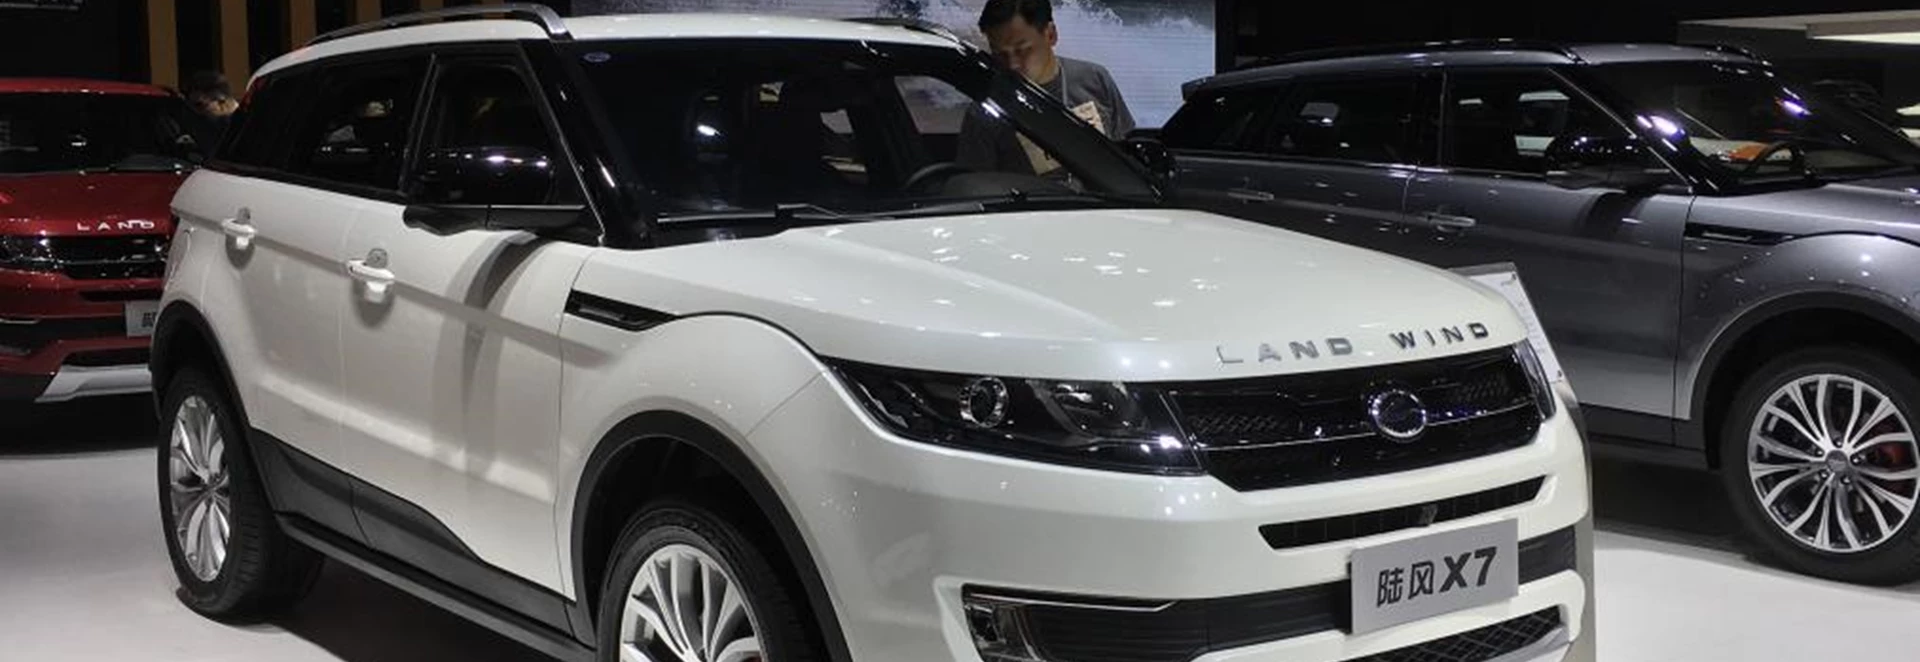 Attack of the clones? Range Rover smashed by Chinese copycat 